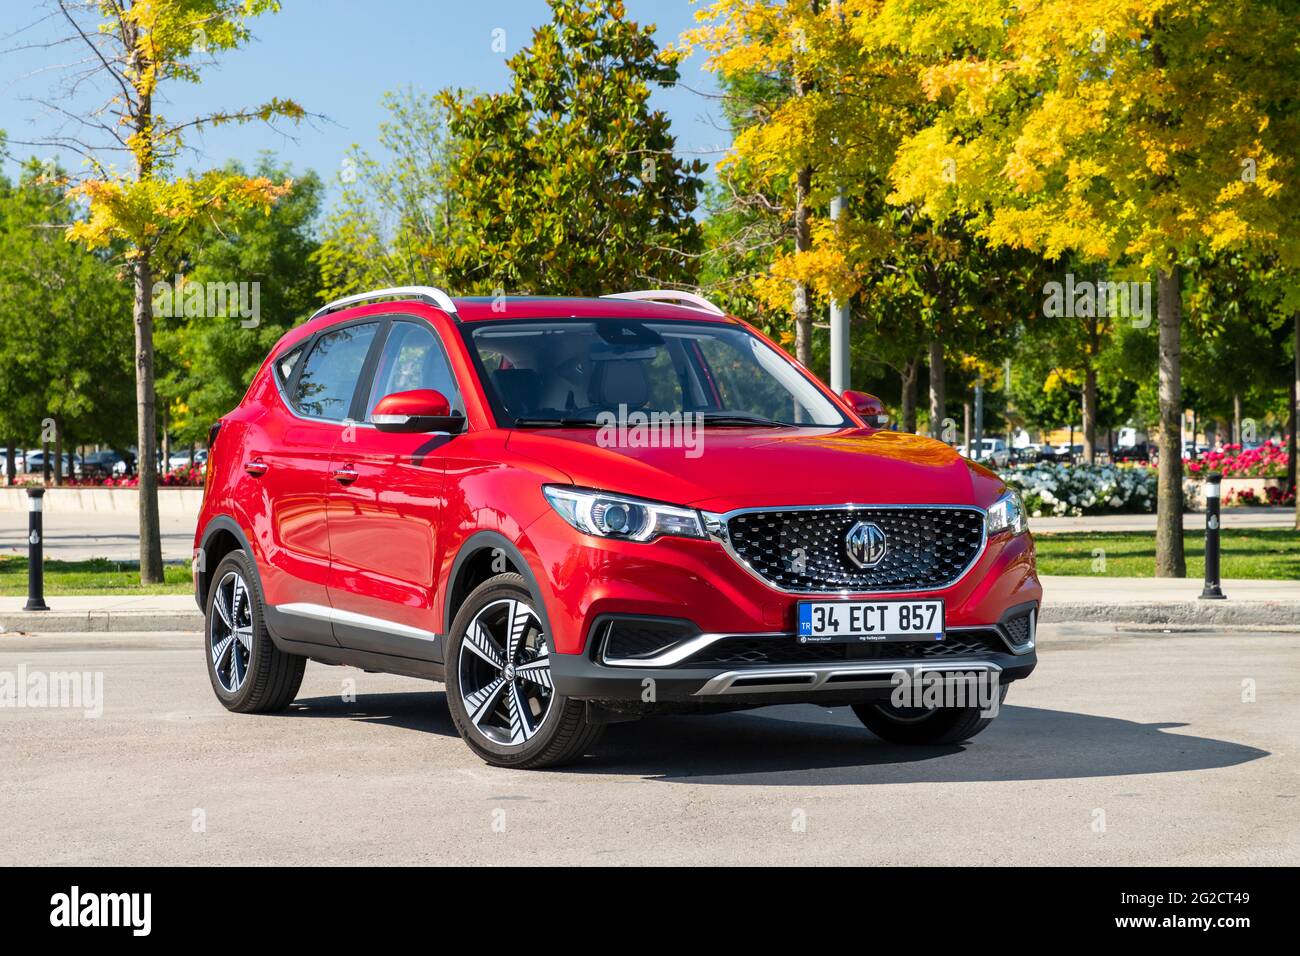 https://c8.alamy.com/comp/2G2CT49/mg-zs-is-a-subcompact-crossover-suv-produced-by-saic-motor-under-the-mg-marque-an-all-electric-version-made-its-debut-as-zs-ev-2G2CT49.jpg